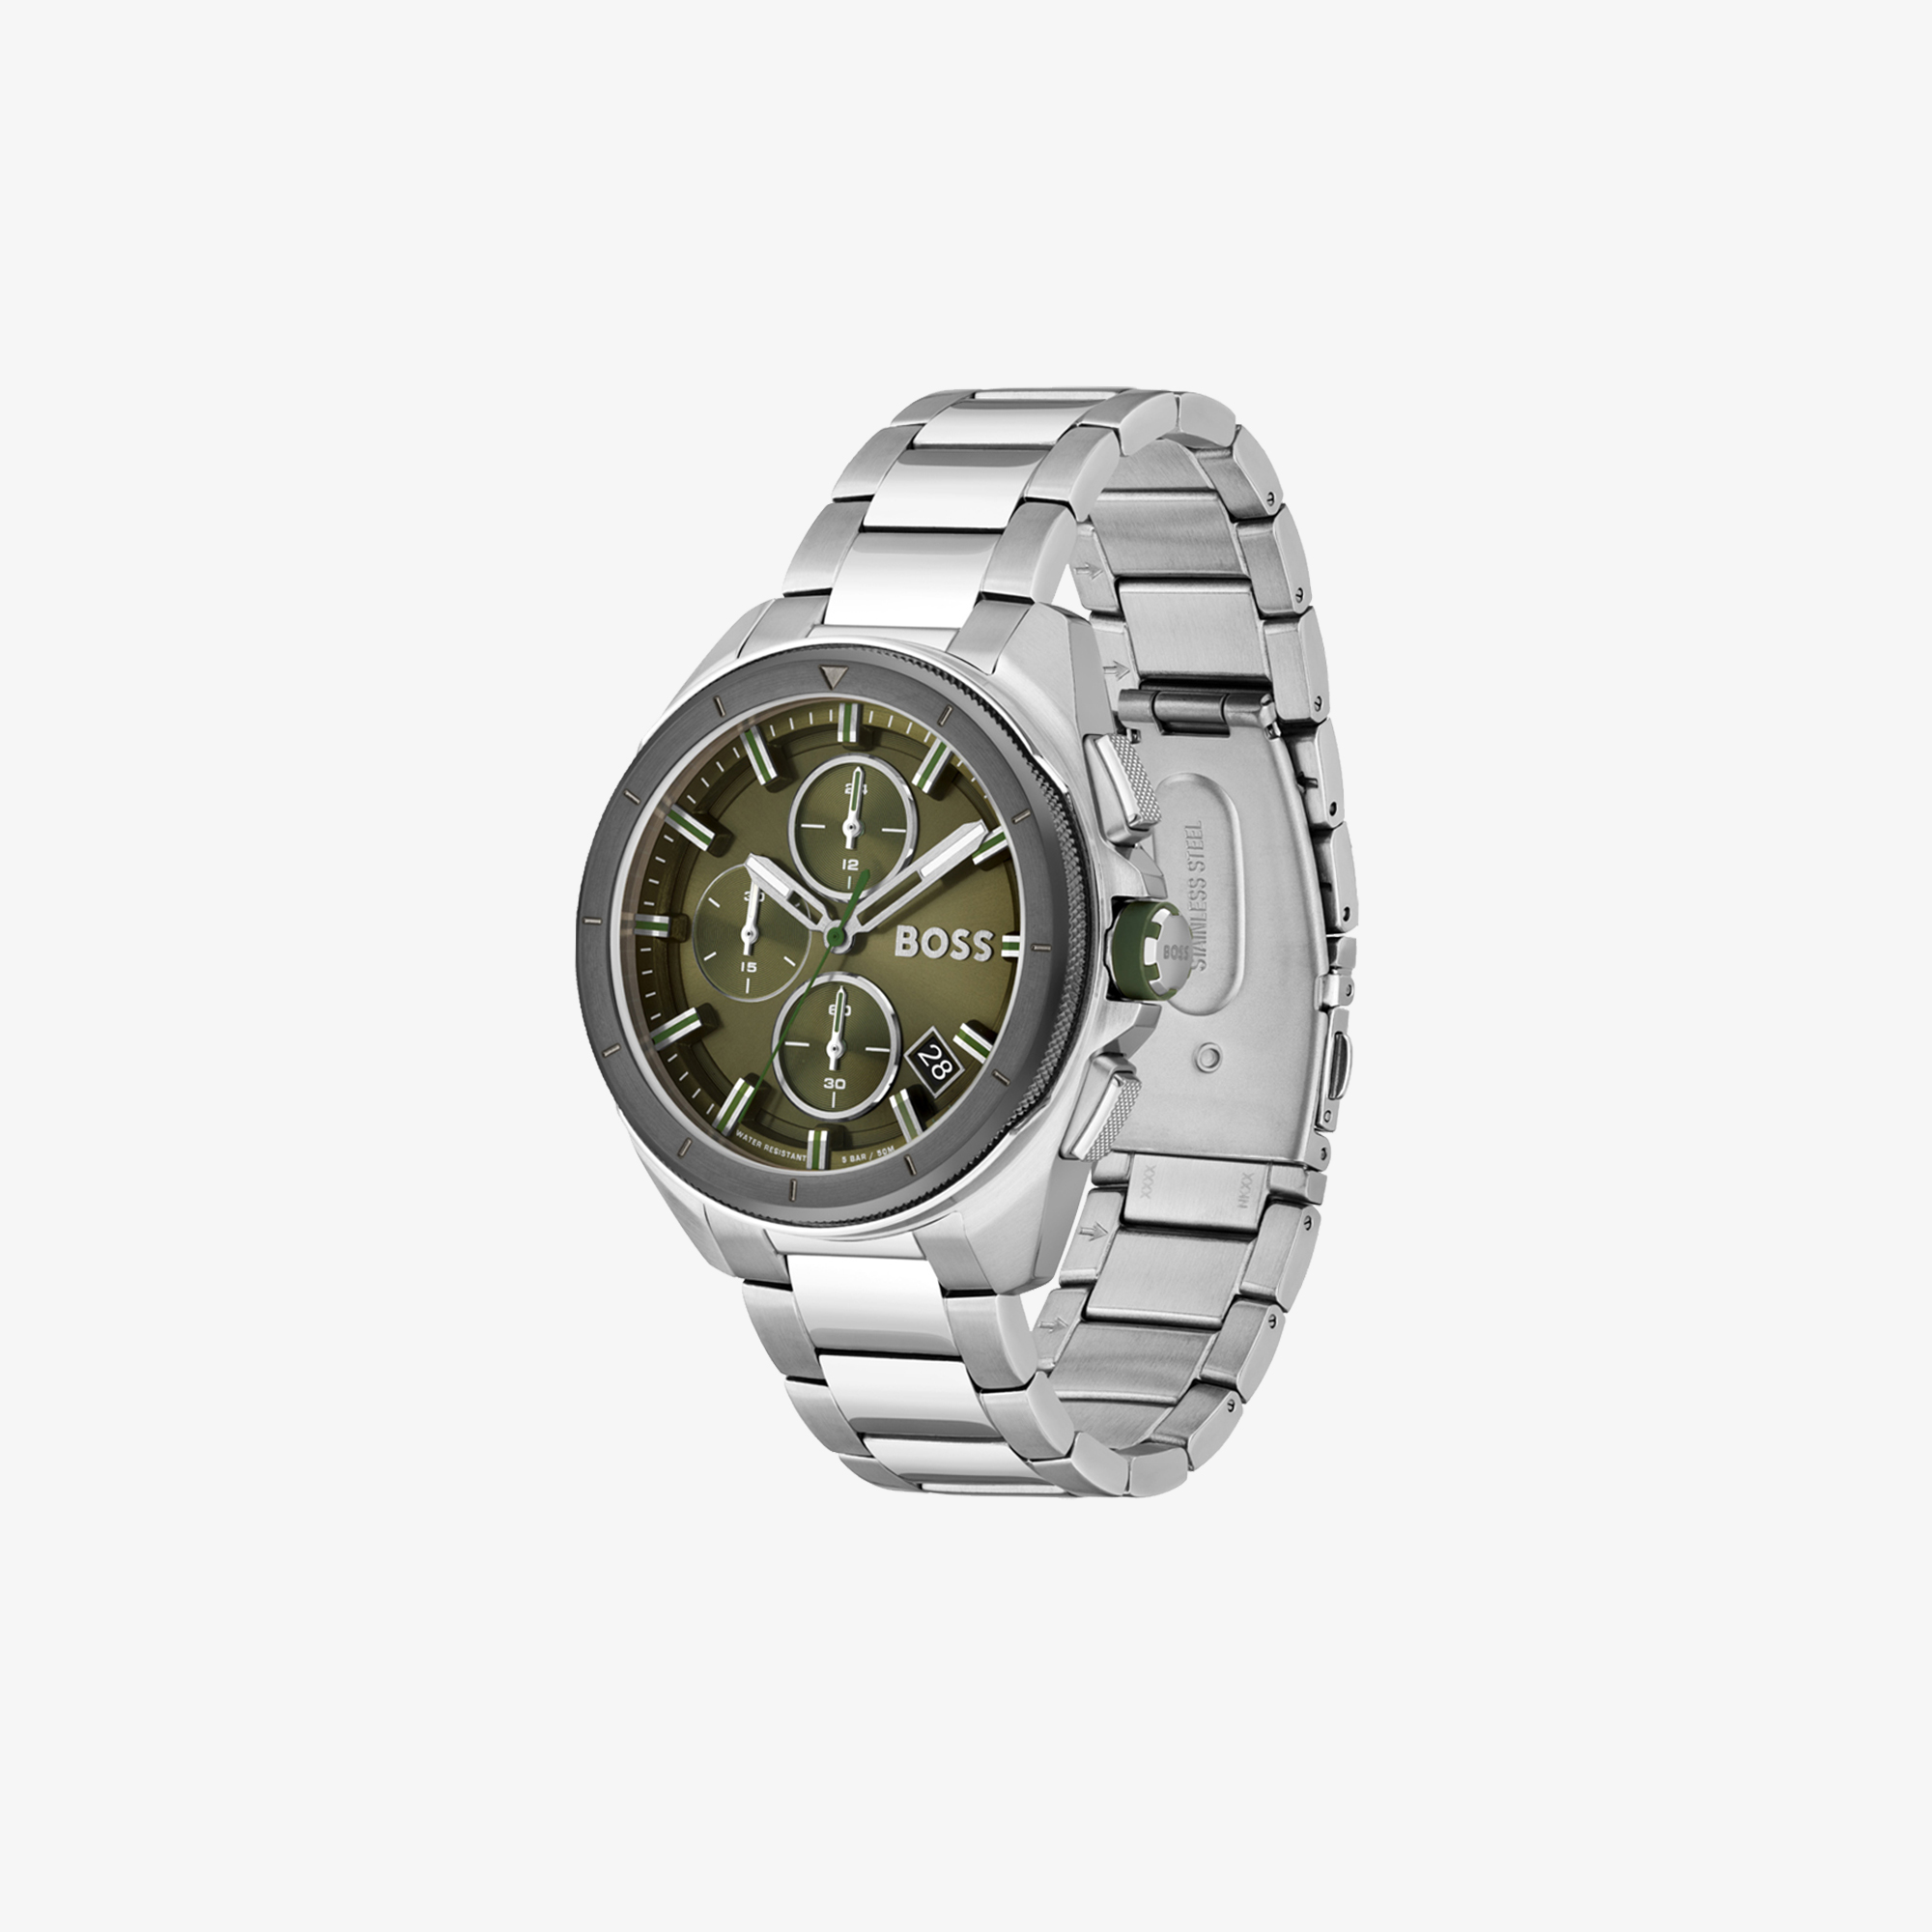 HUGO BOSS VOLANE CHRONOGRAPH WITH OLIVE GREEN DIAL